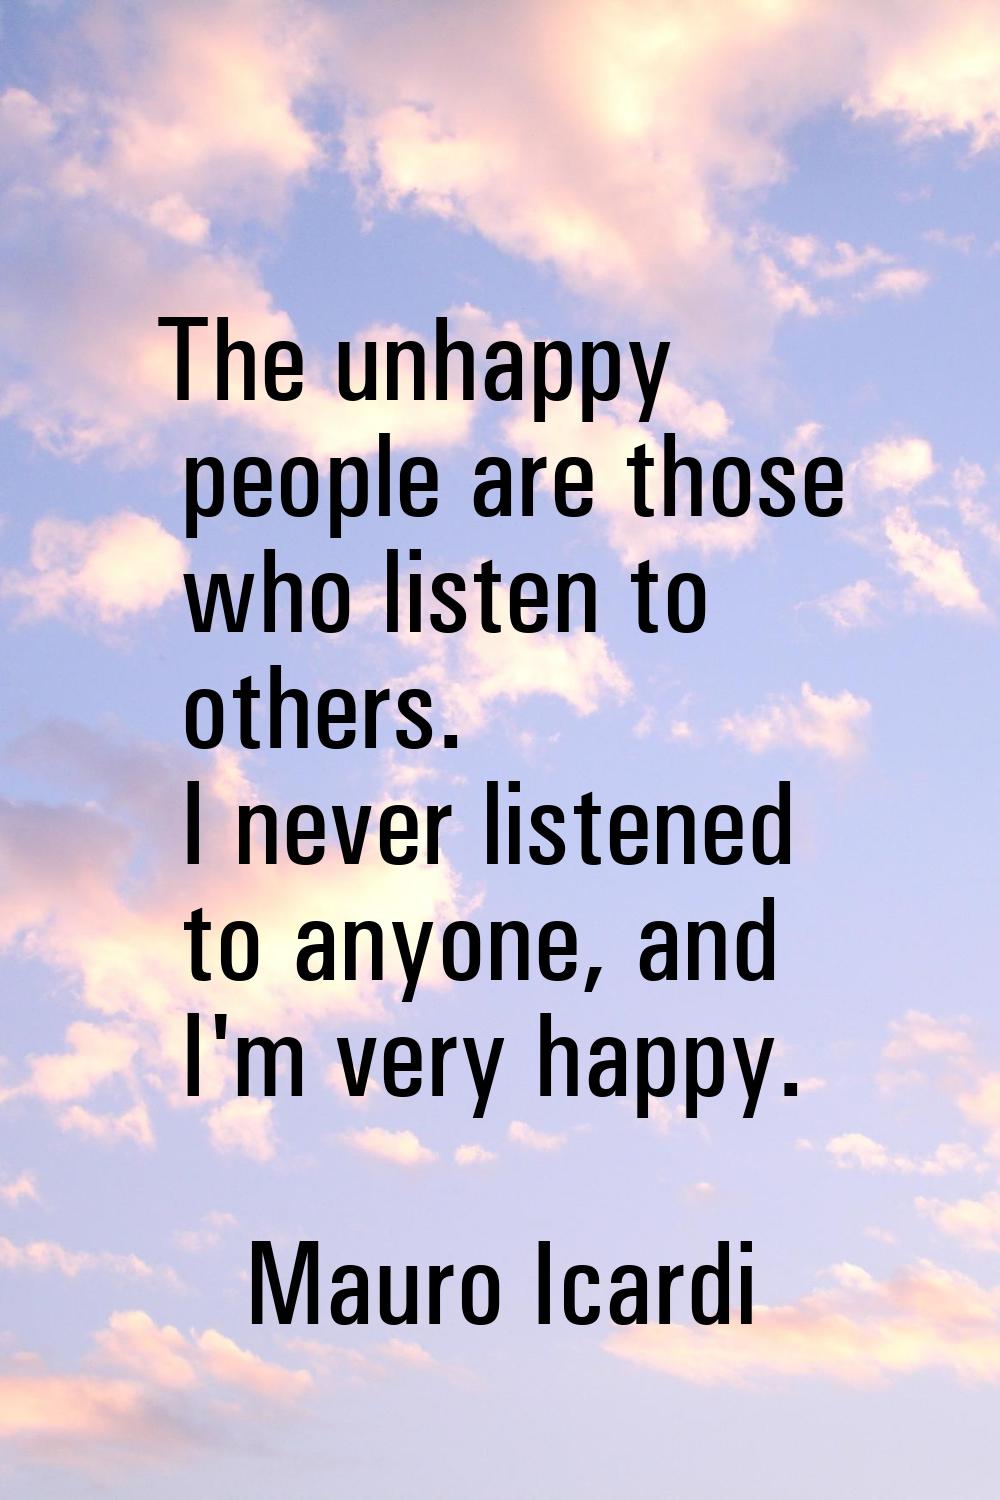 The unhappy people are those who listen to others. I never listened to anyone, and I'm very happy.